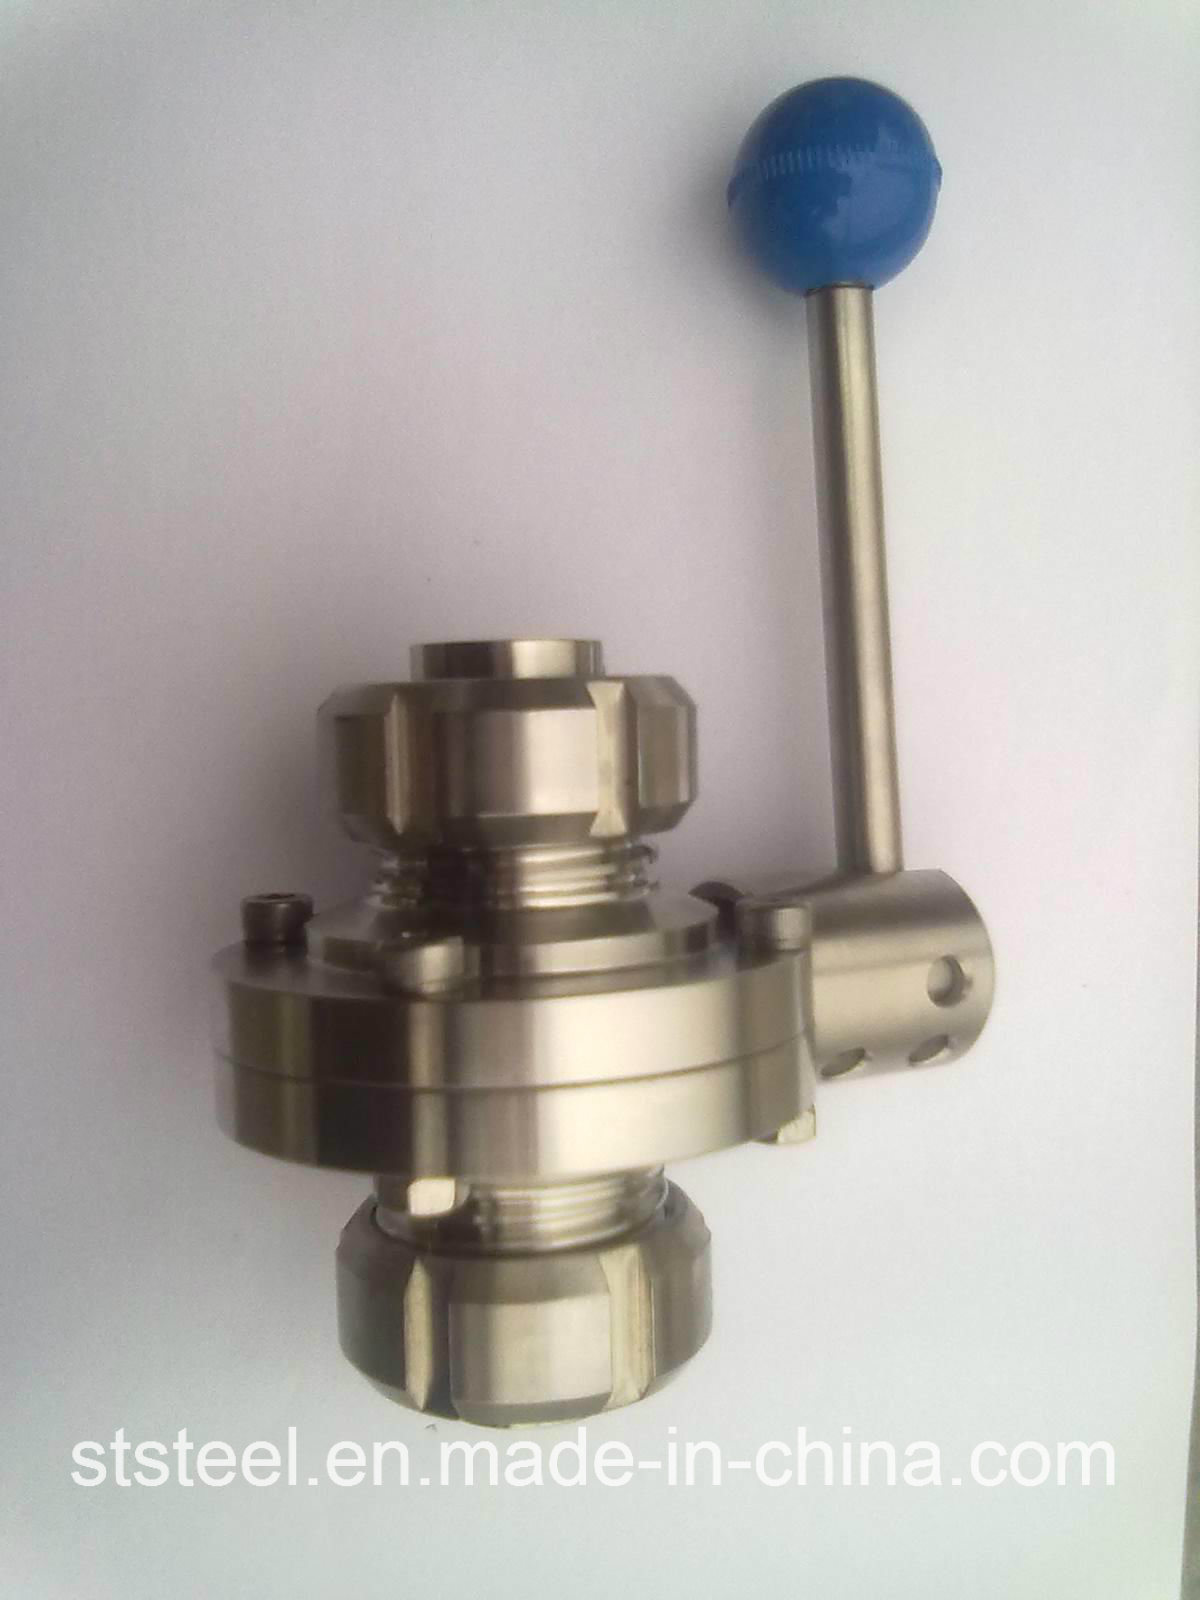 Sanitary Union Type Butterfly Valves